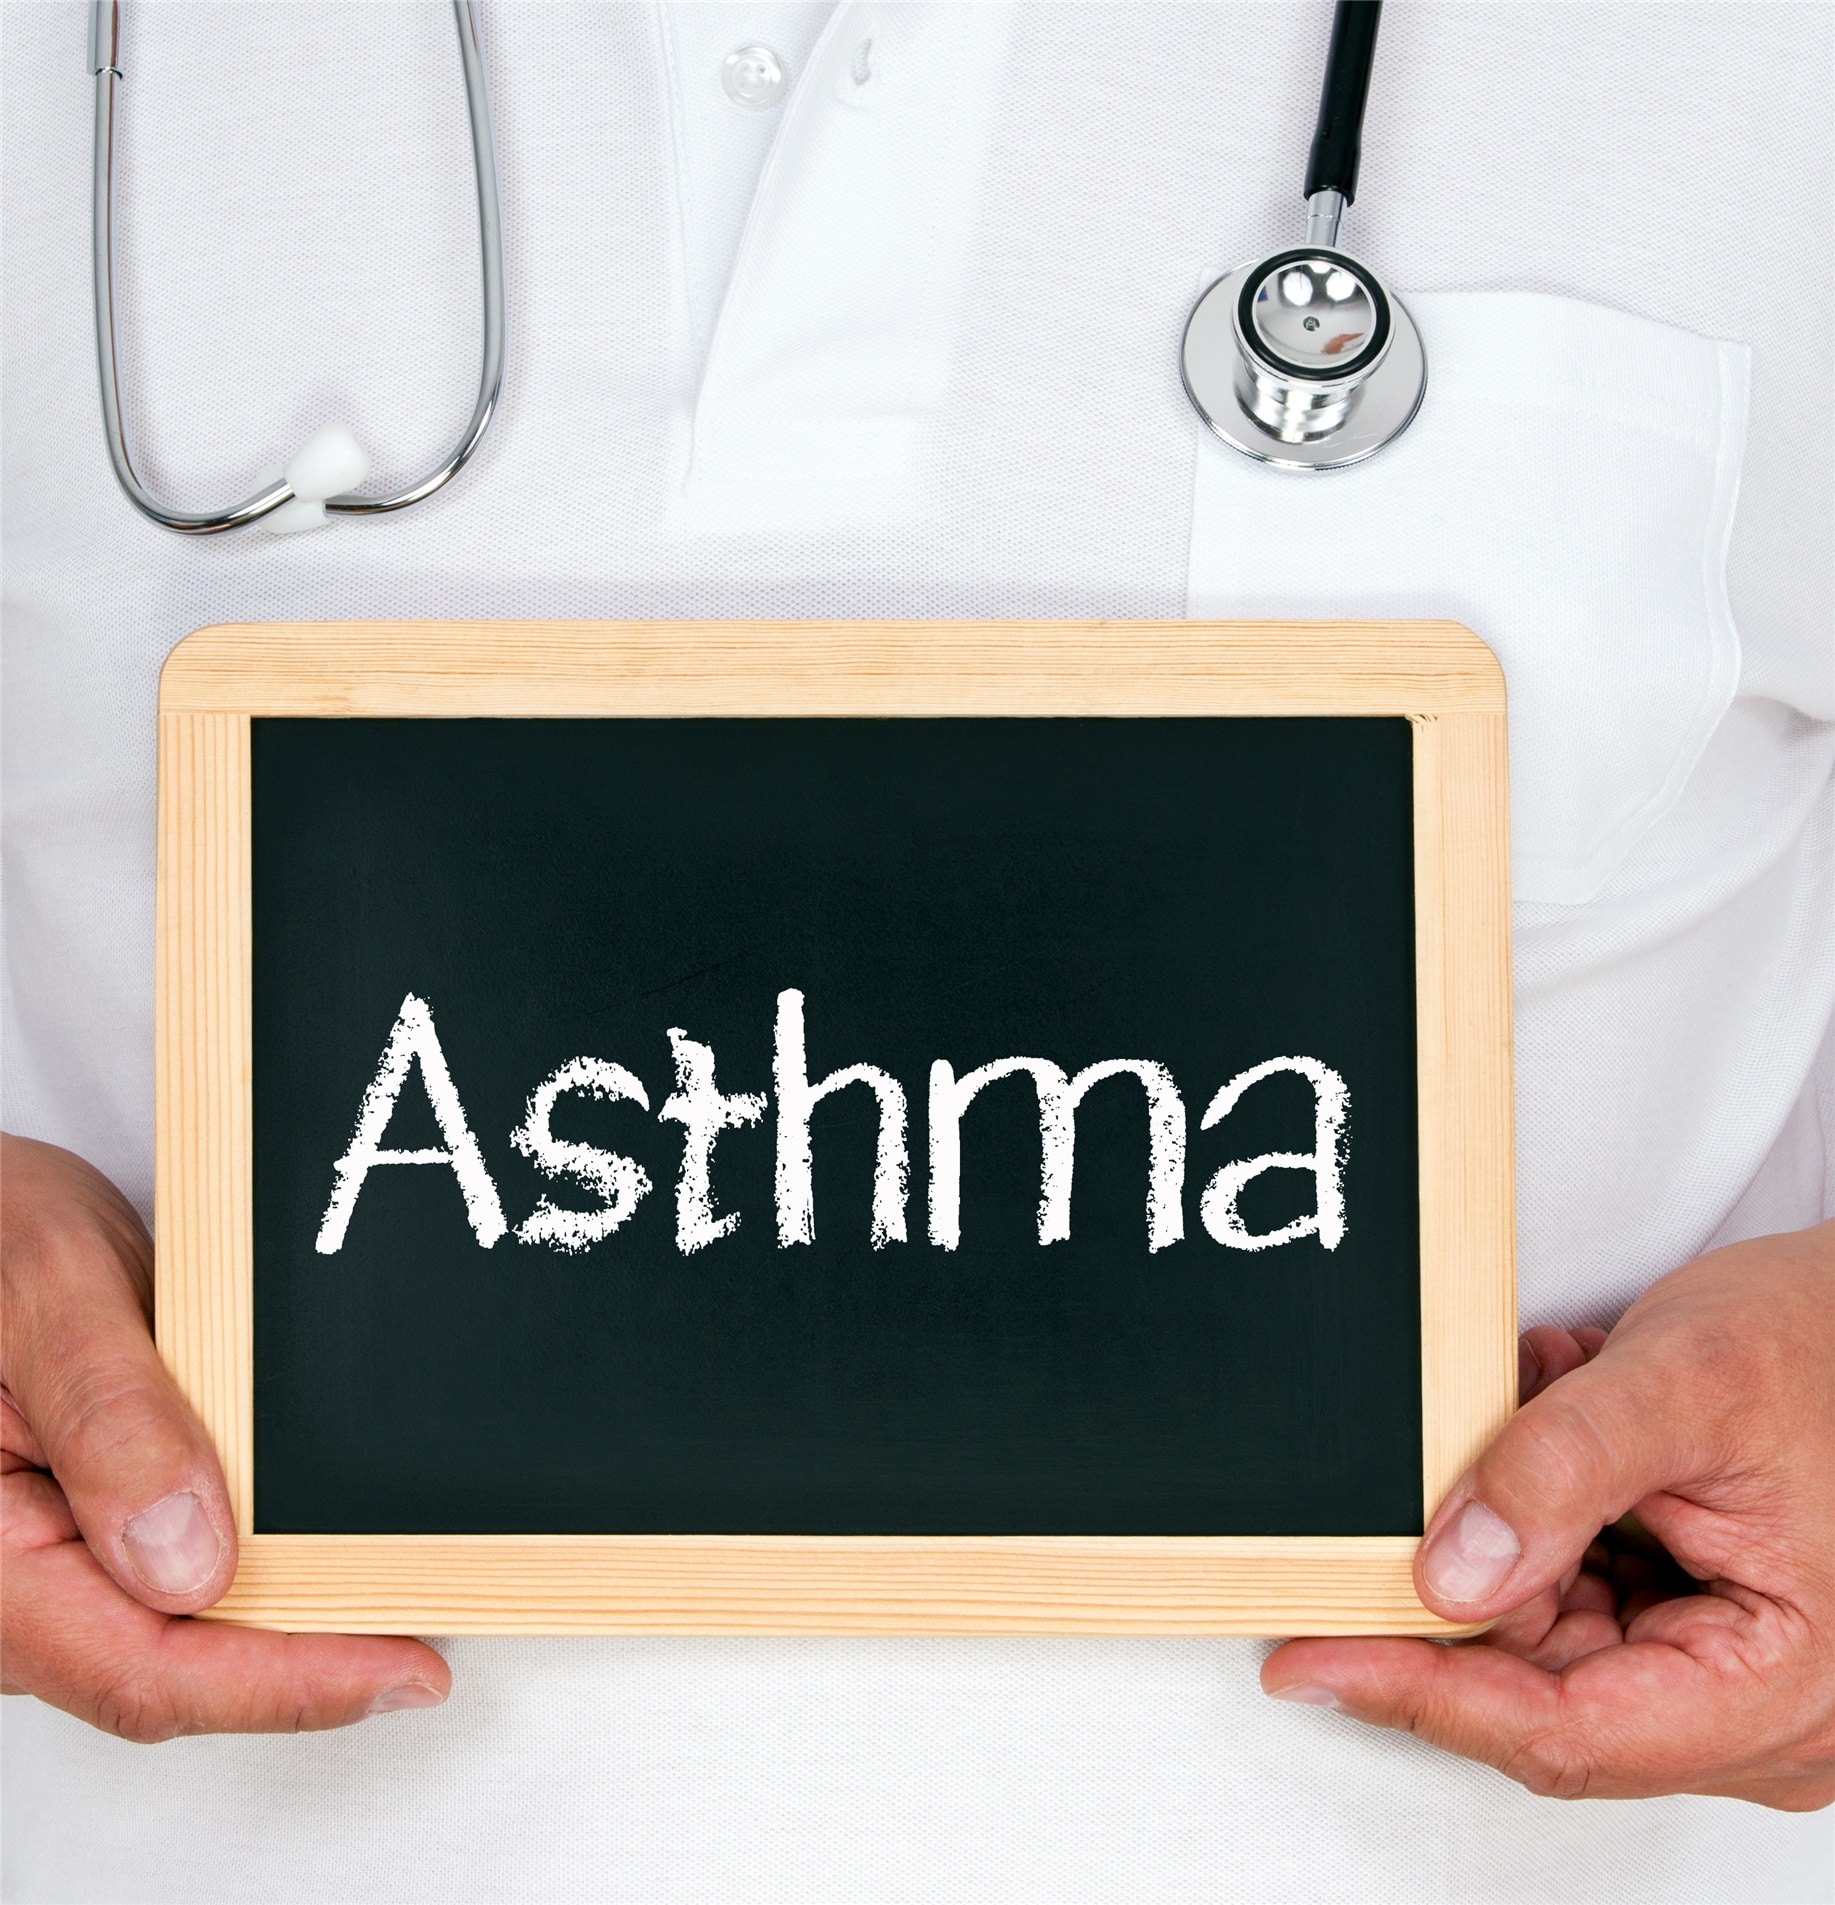 Is it hard to get asthma life insurance?